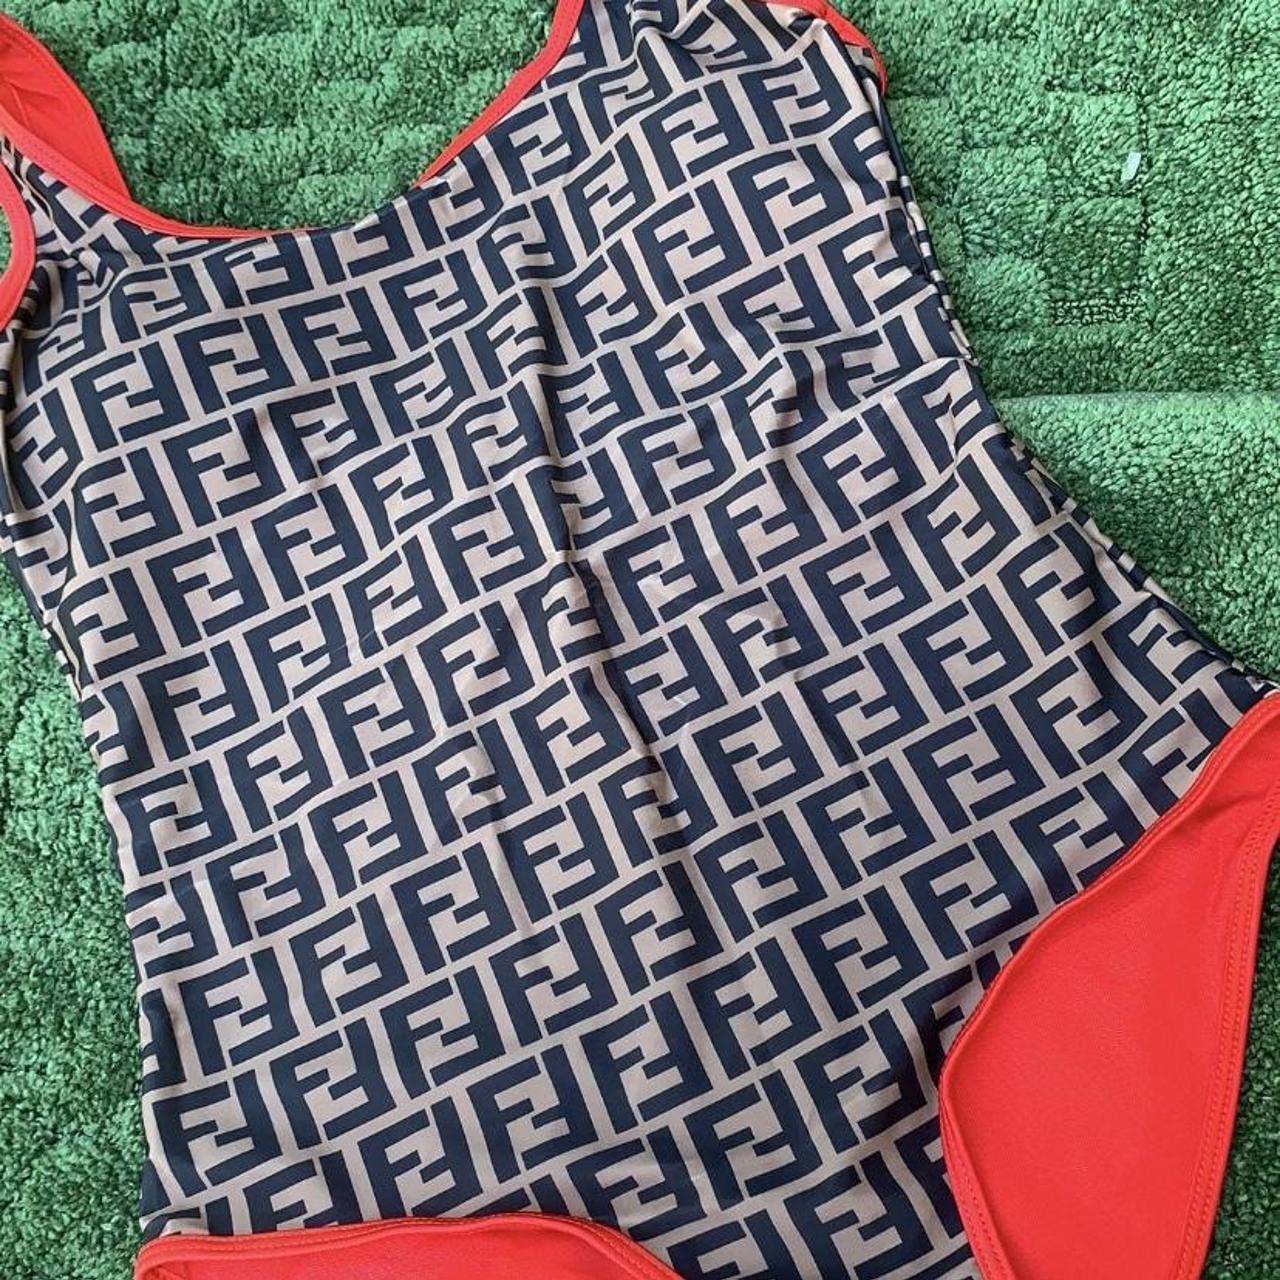 Fendi Women's Red and Brown Swimsuit-one-piece | Depop